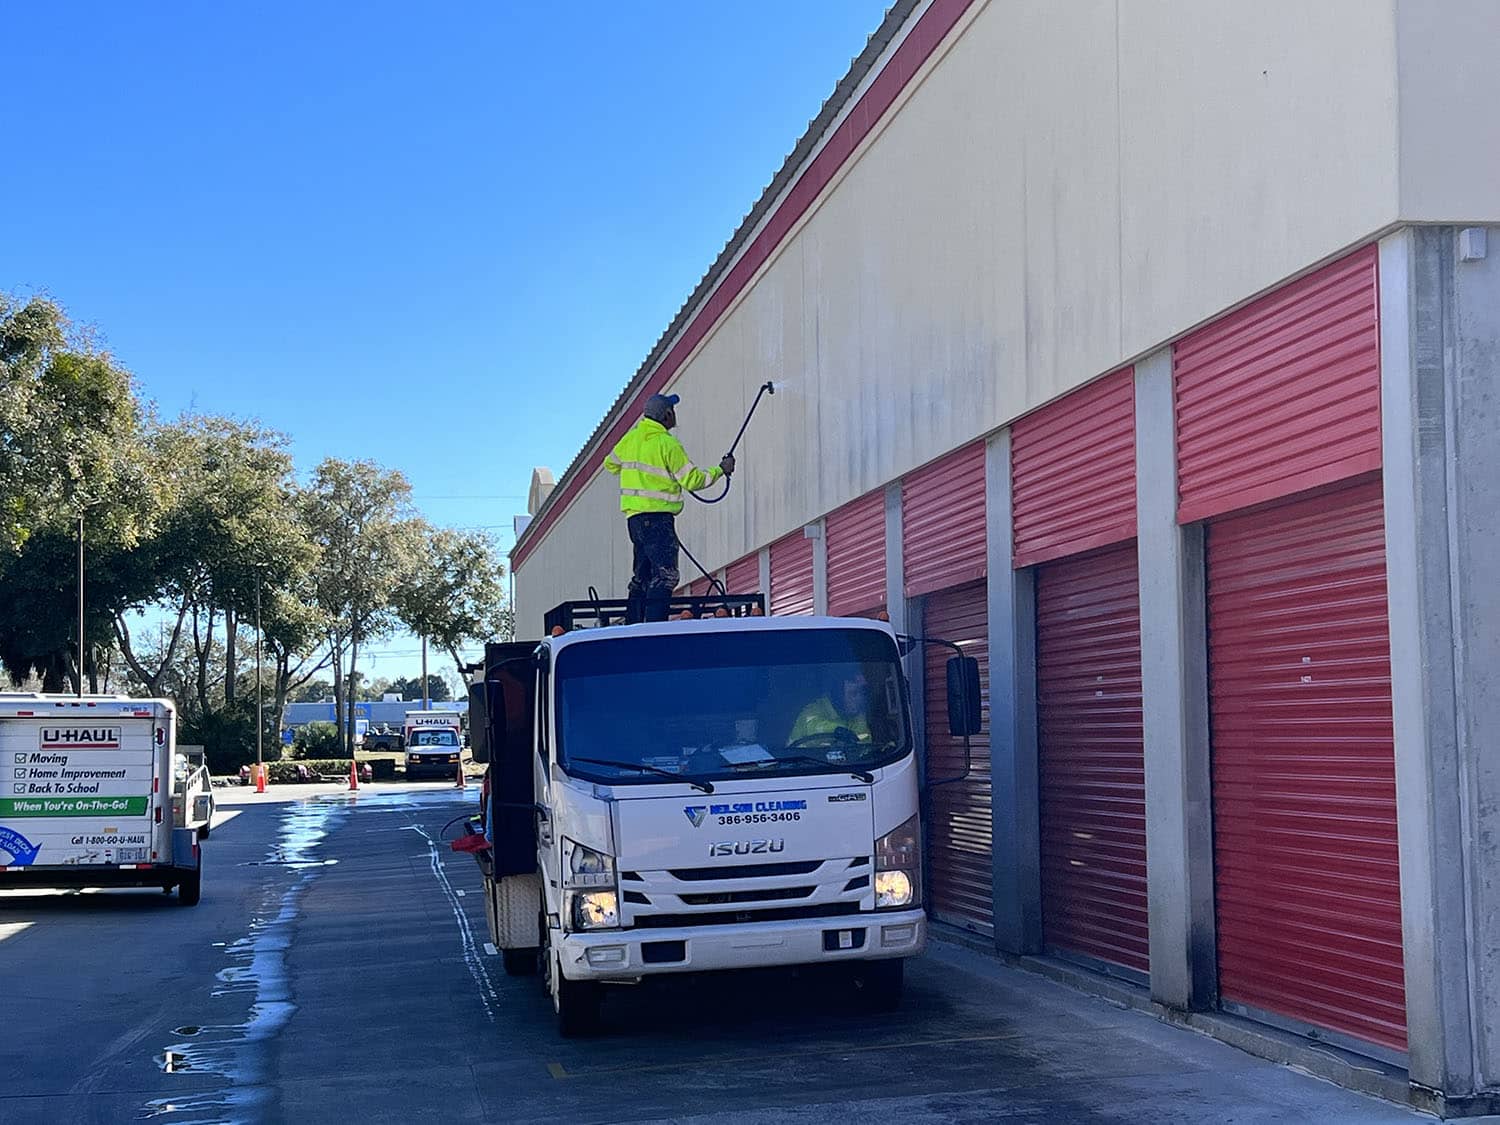 pressure washing professional washing storage unit building while standing on work truck